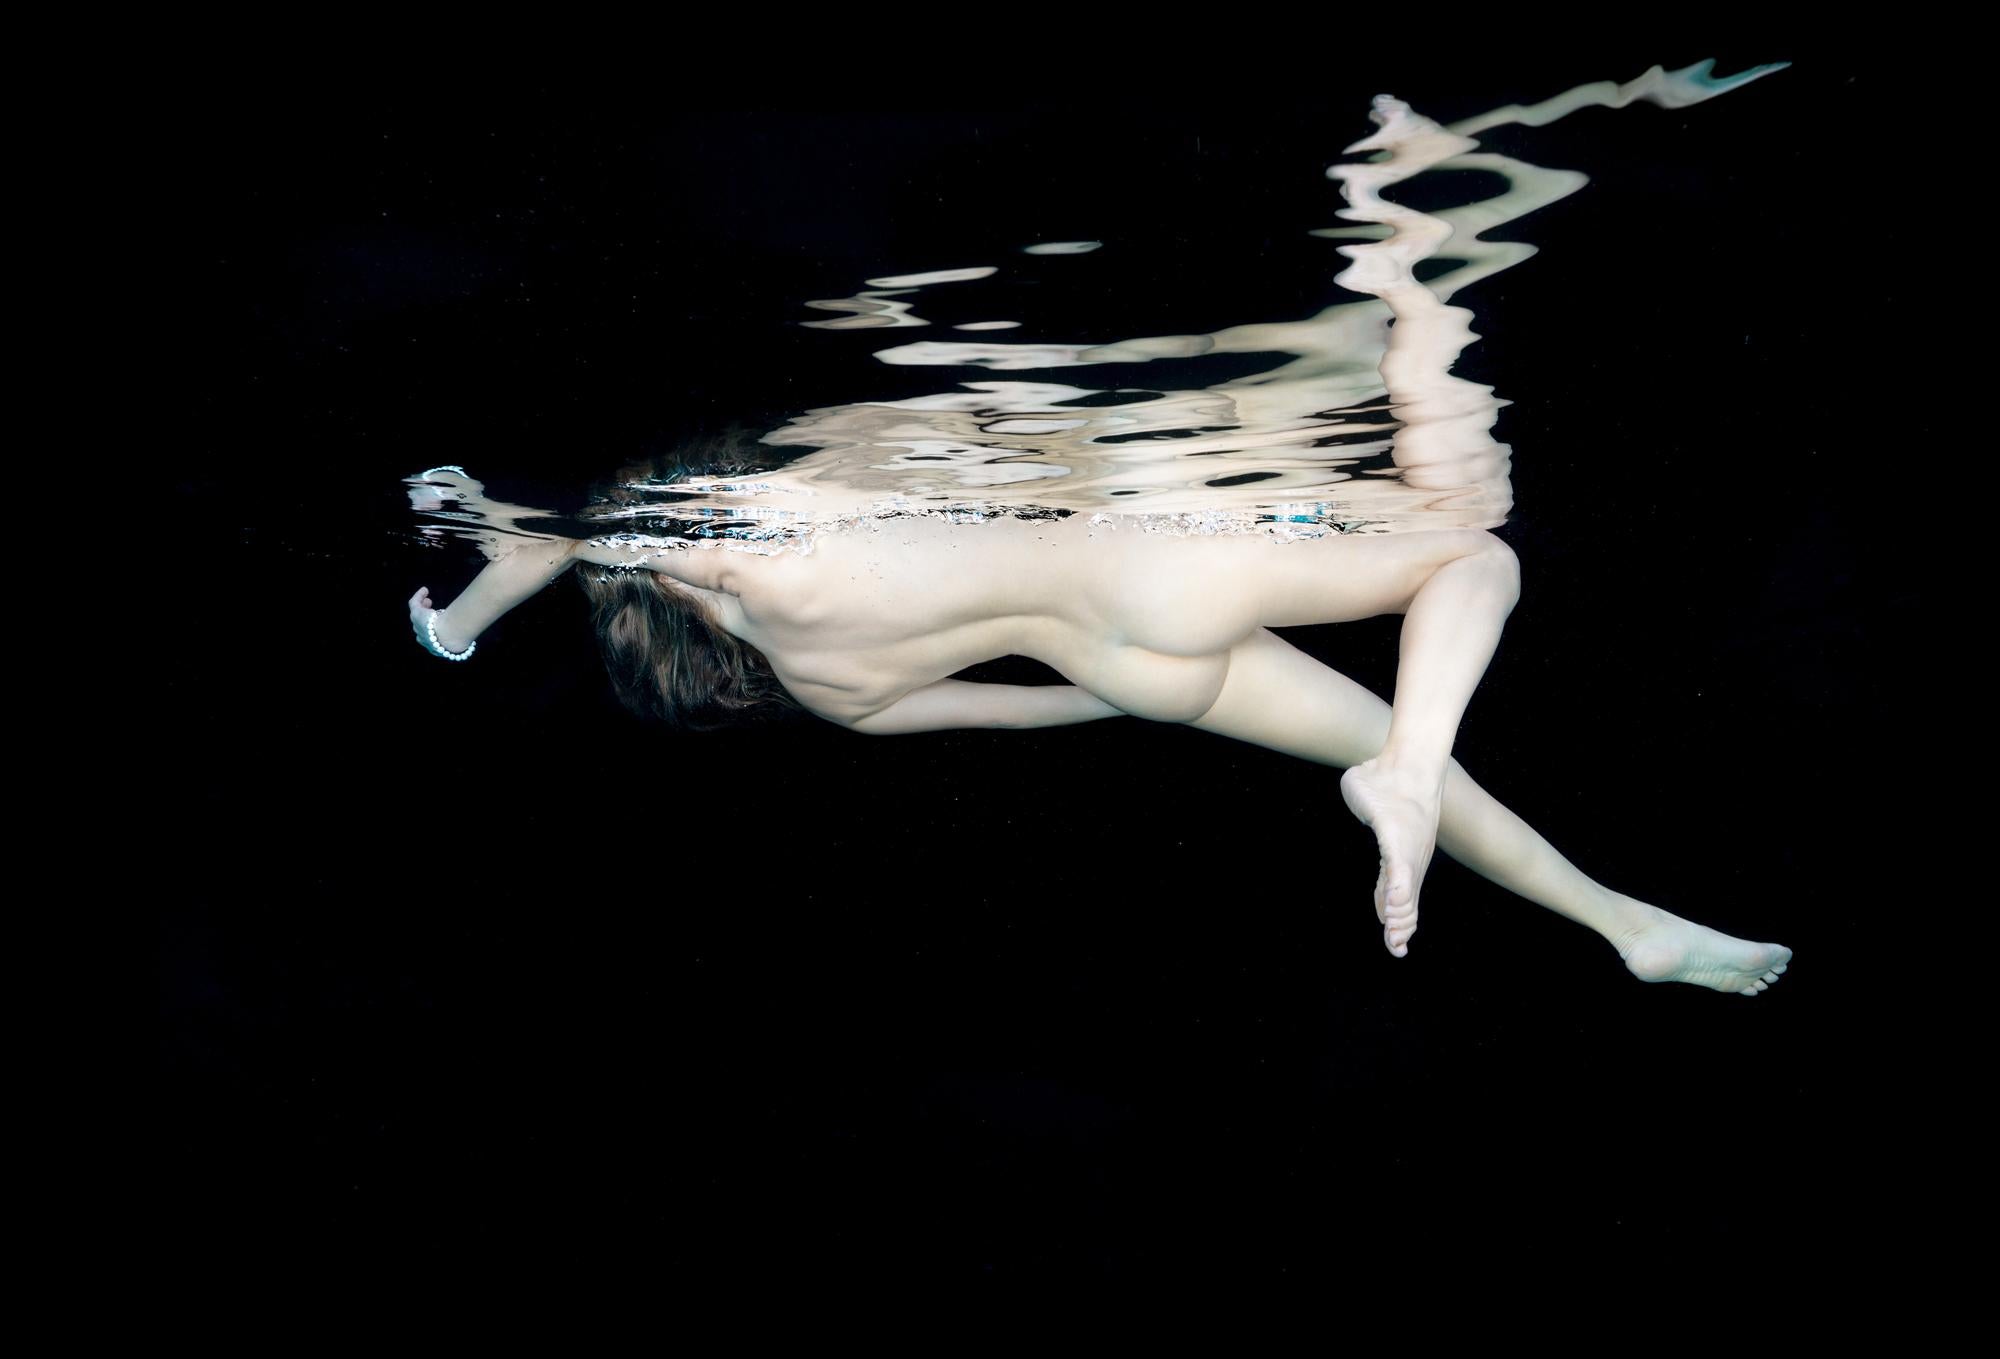 Alex Sher Nude Photograph - Porcelain II  - underwater nude photograph - print on paper 36" x 54"